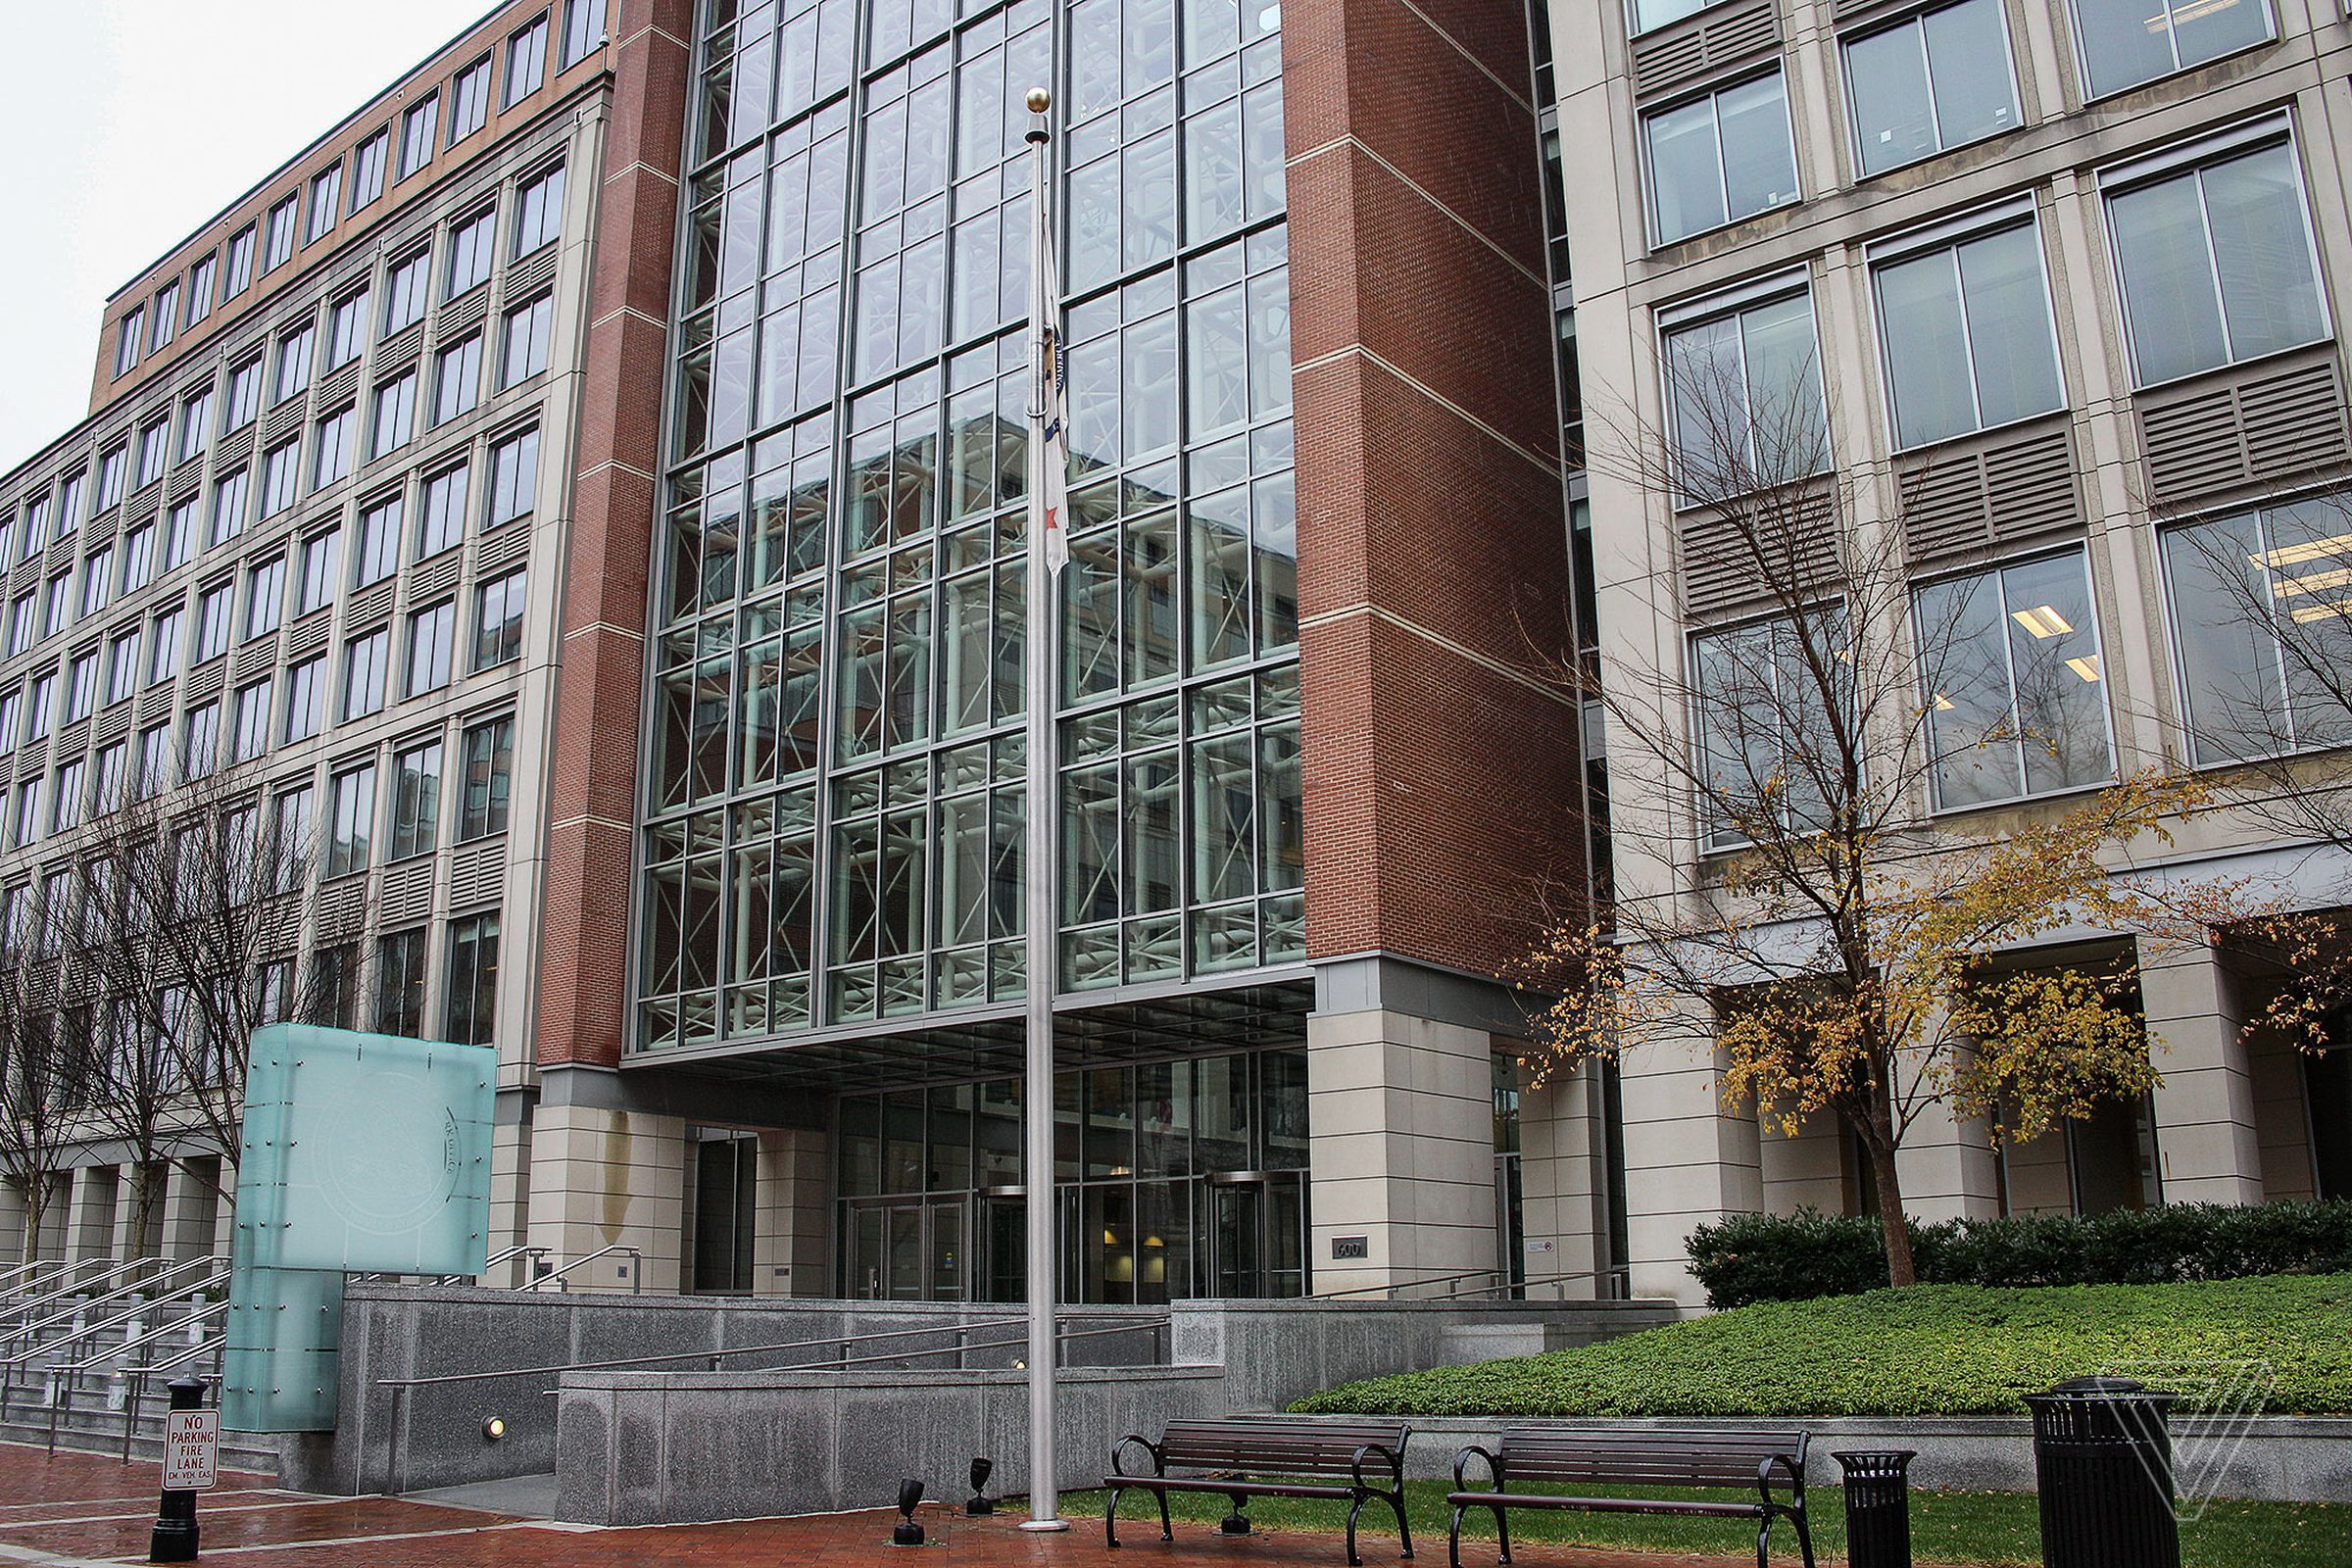 The US Patent and Trademark Office in Alexandria, Virginia